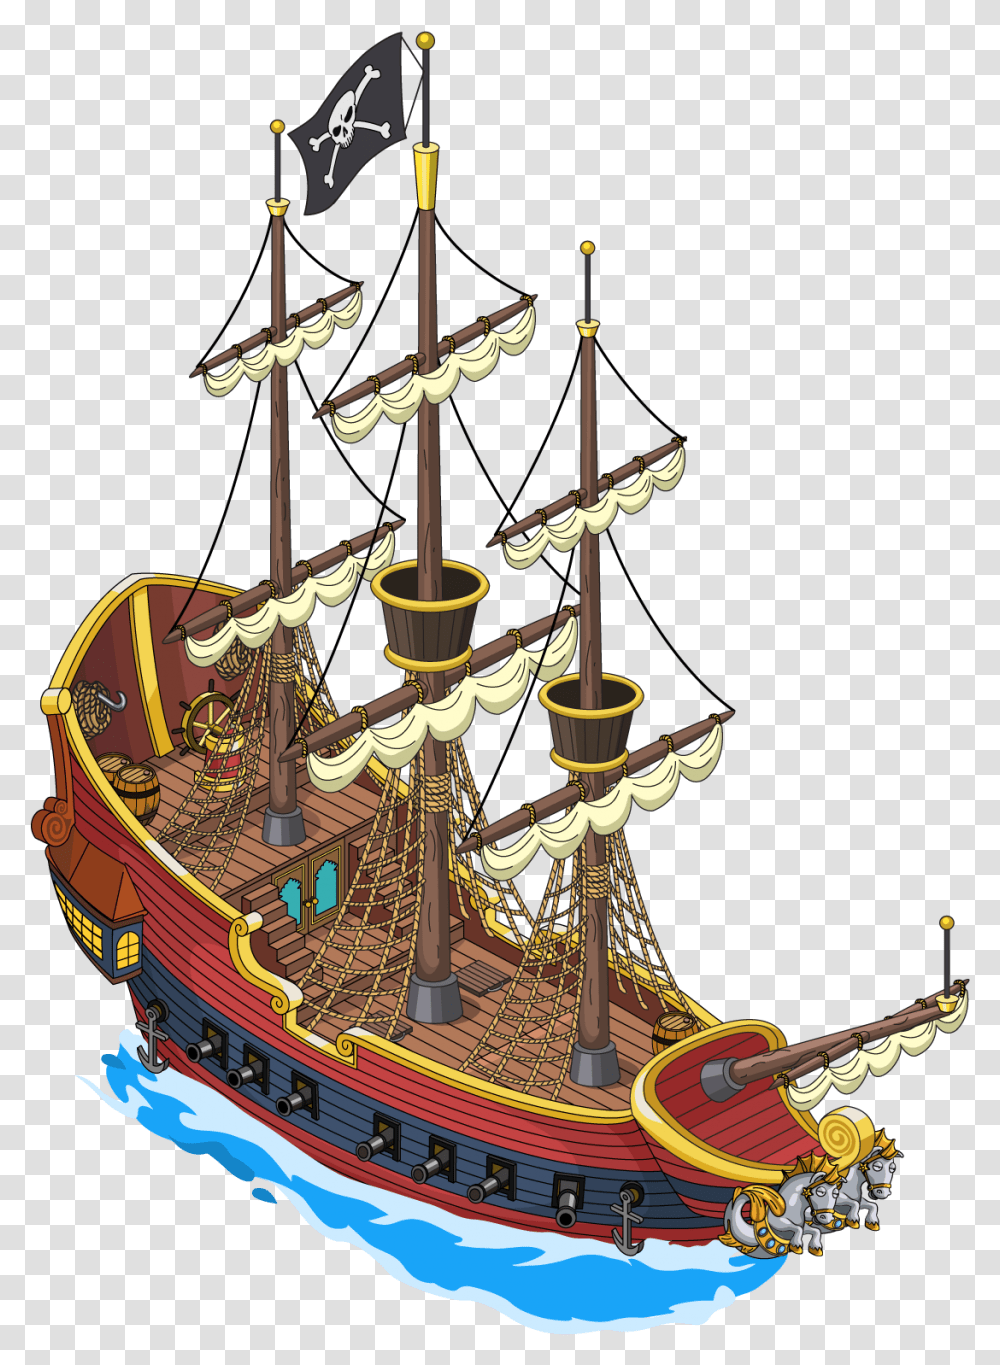 The Quest For Stuff Wiki Galleon, Ship, Vehicle, Transportation, Birthday Cake Transparent Png